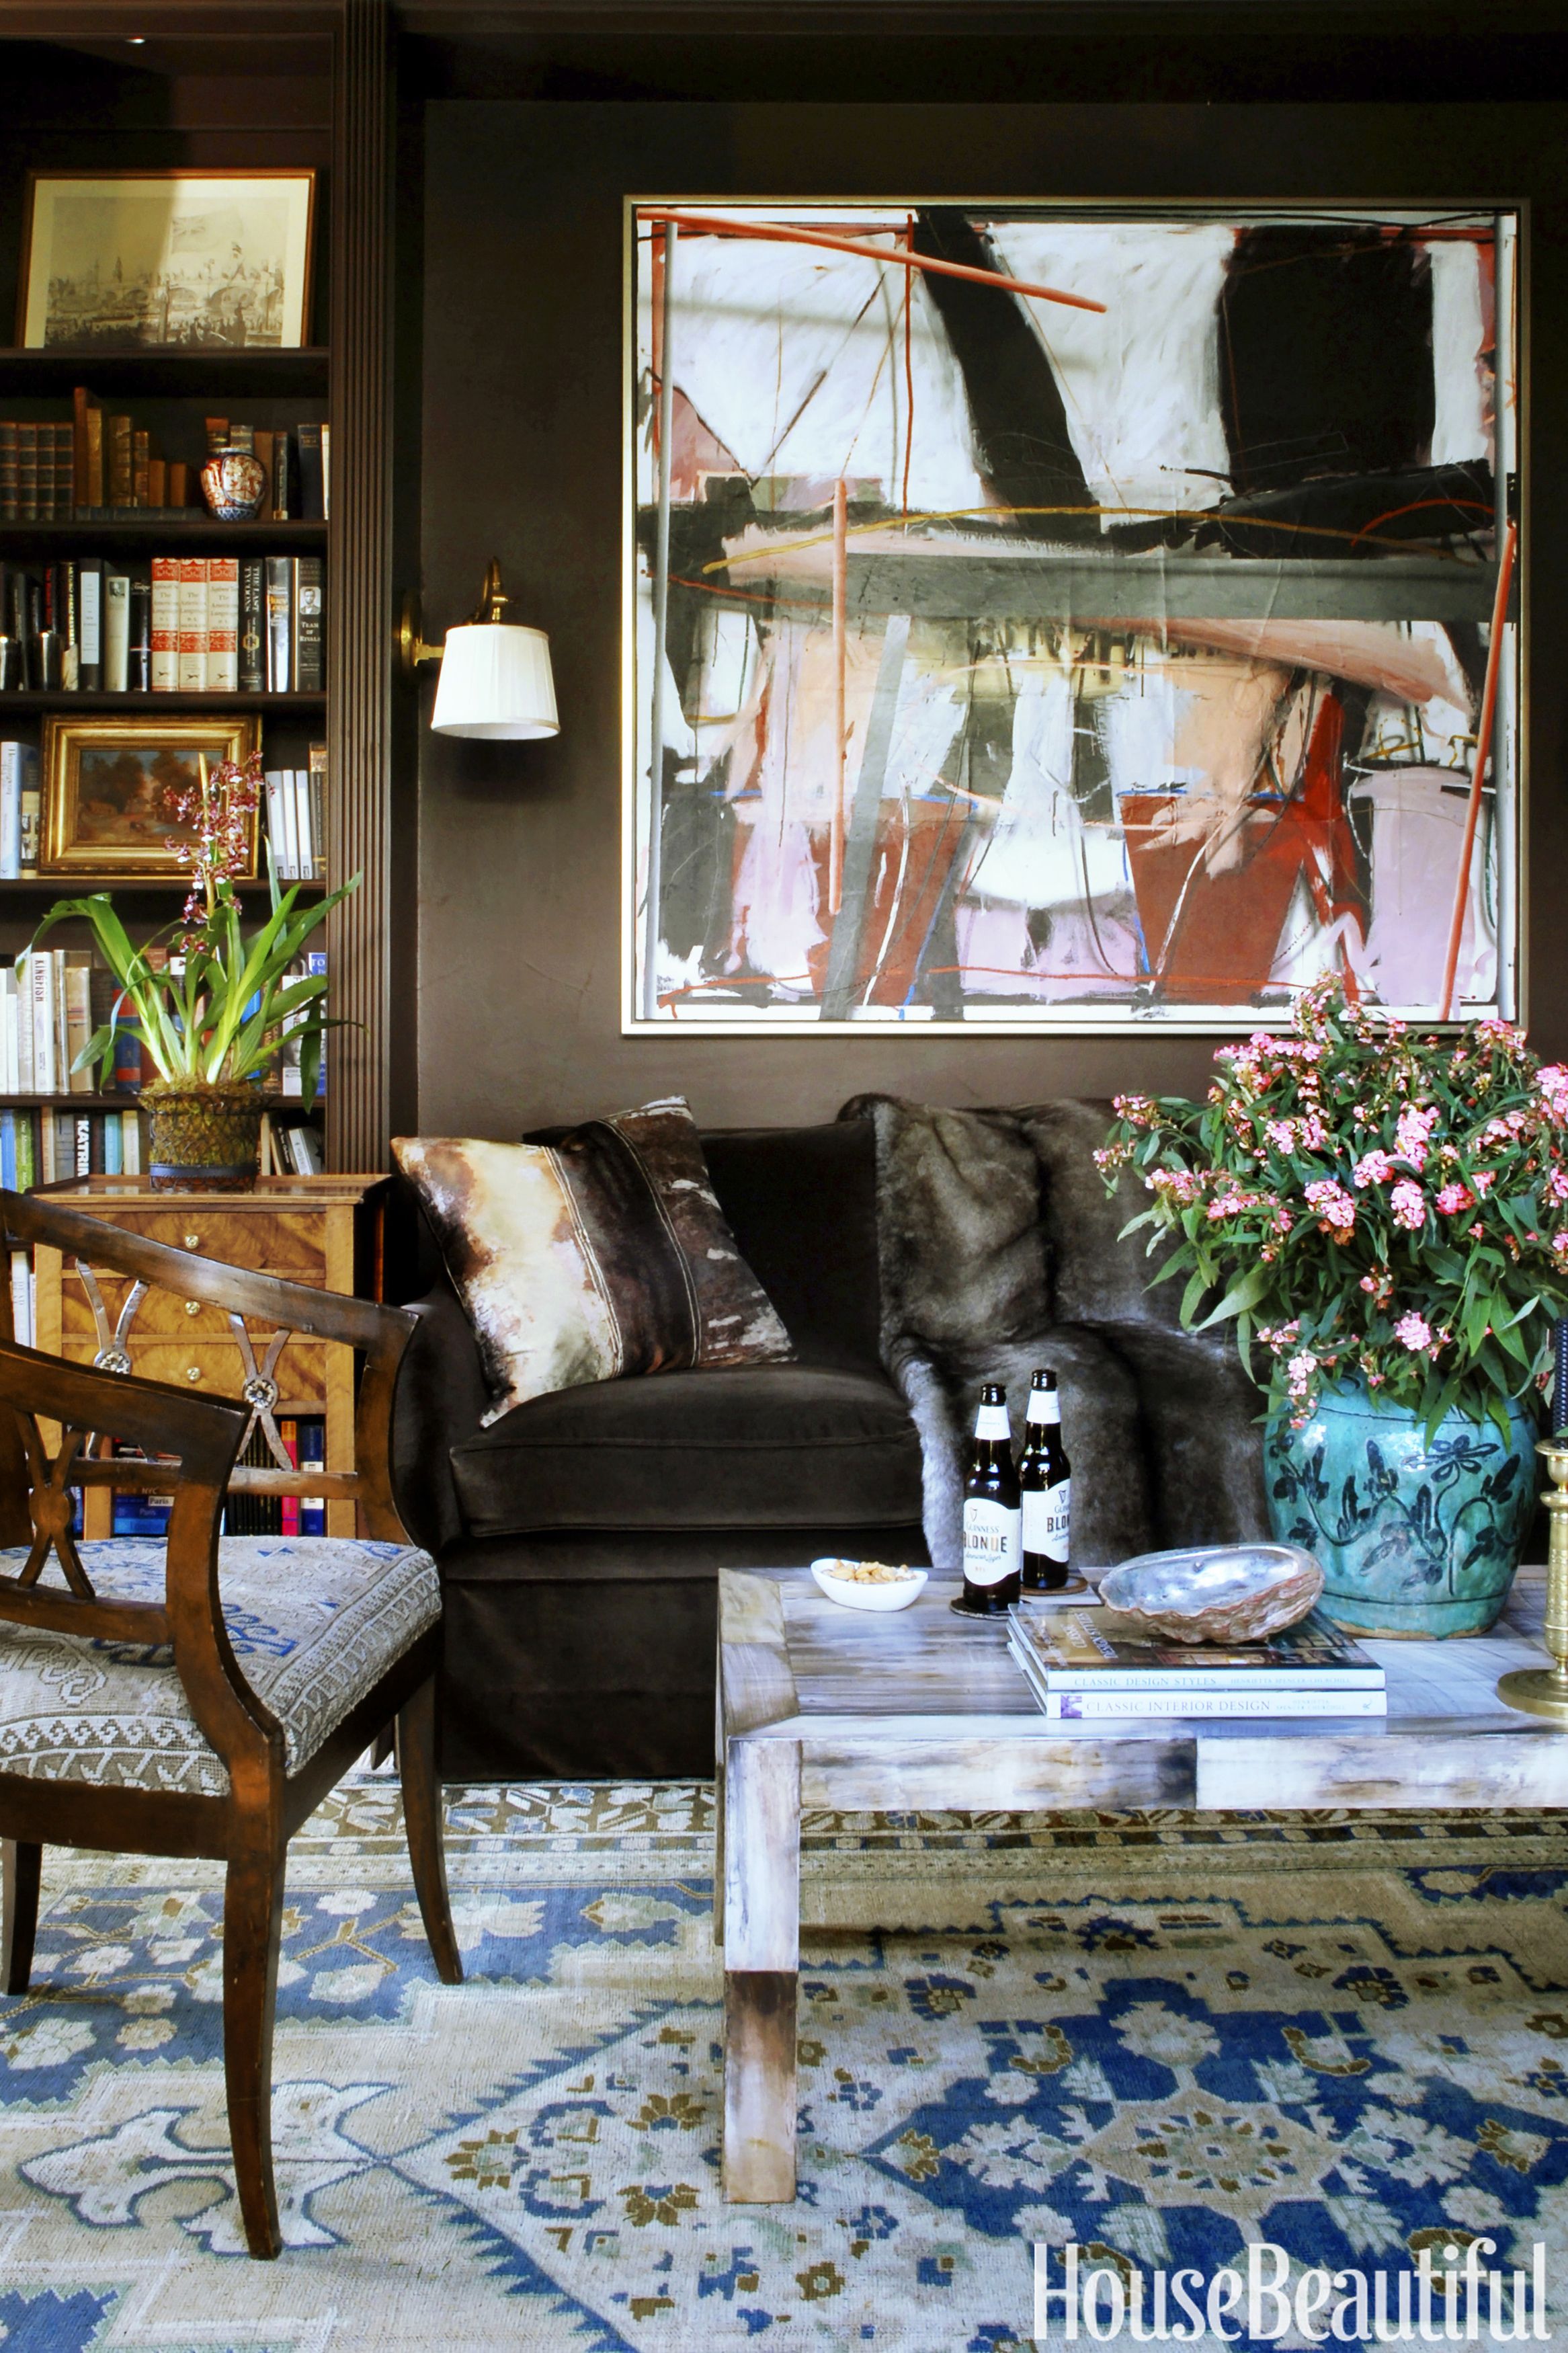 The World's Most Beautiful Bohemian Interiors | Architectural Digest